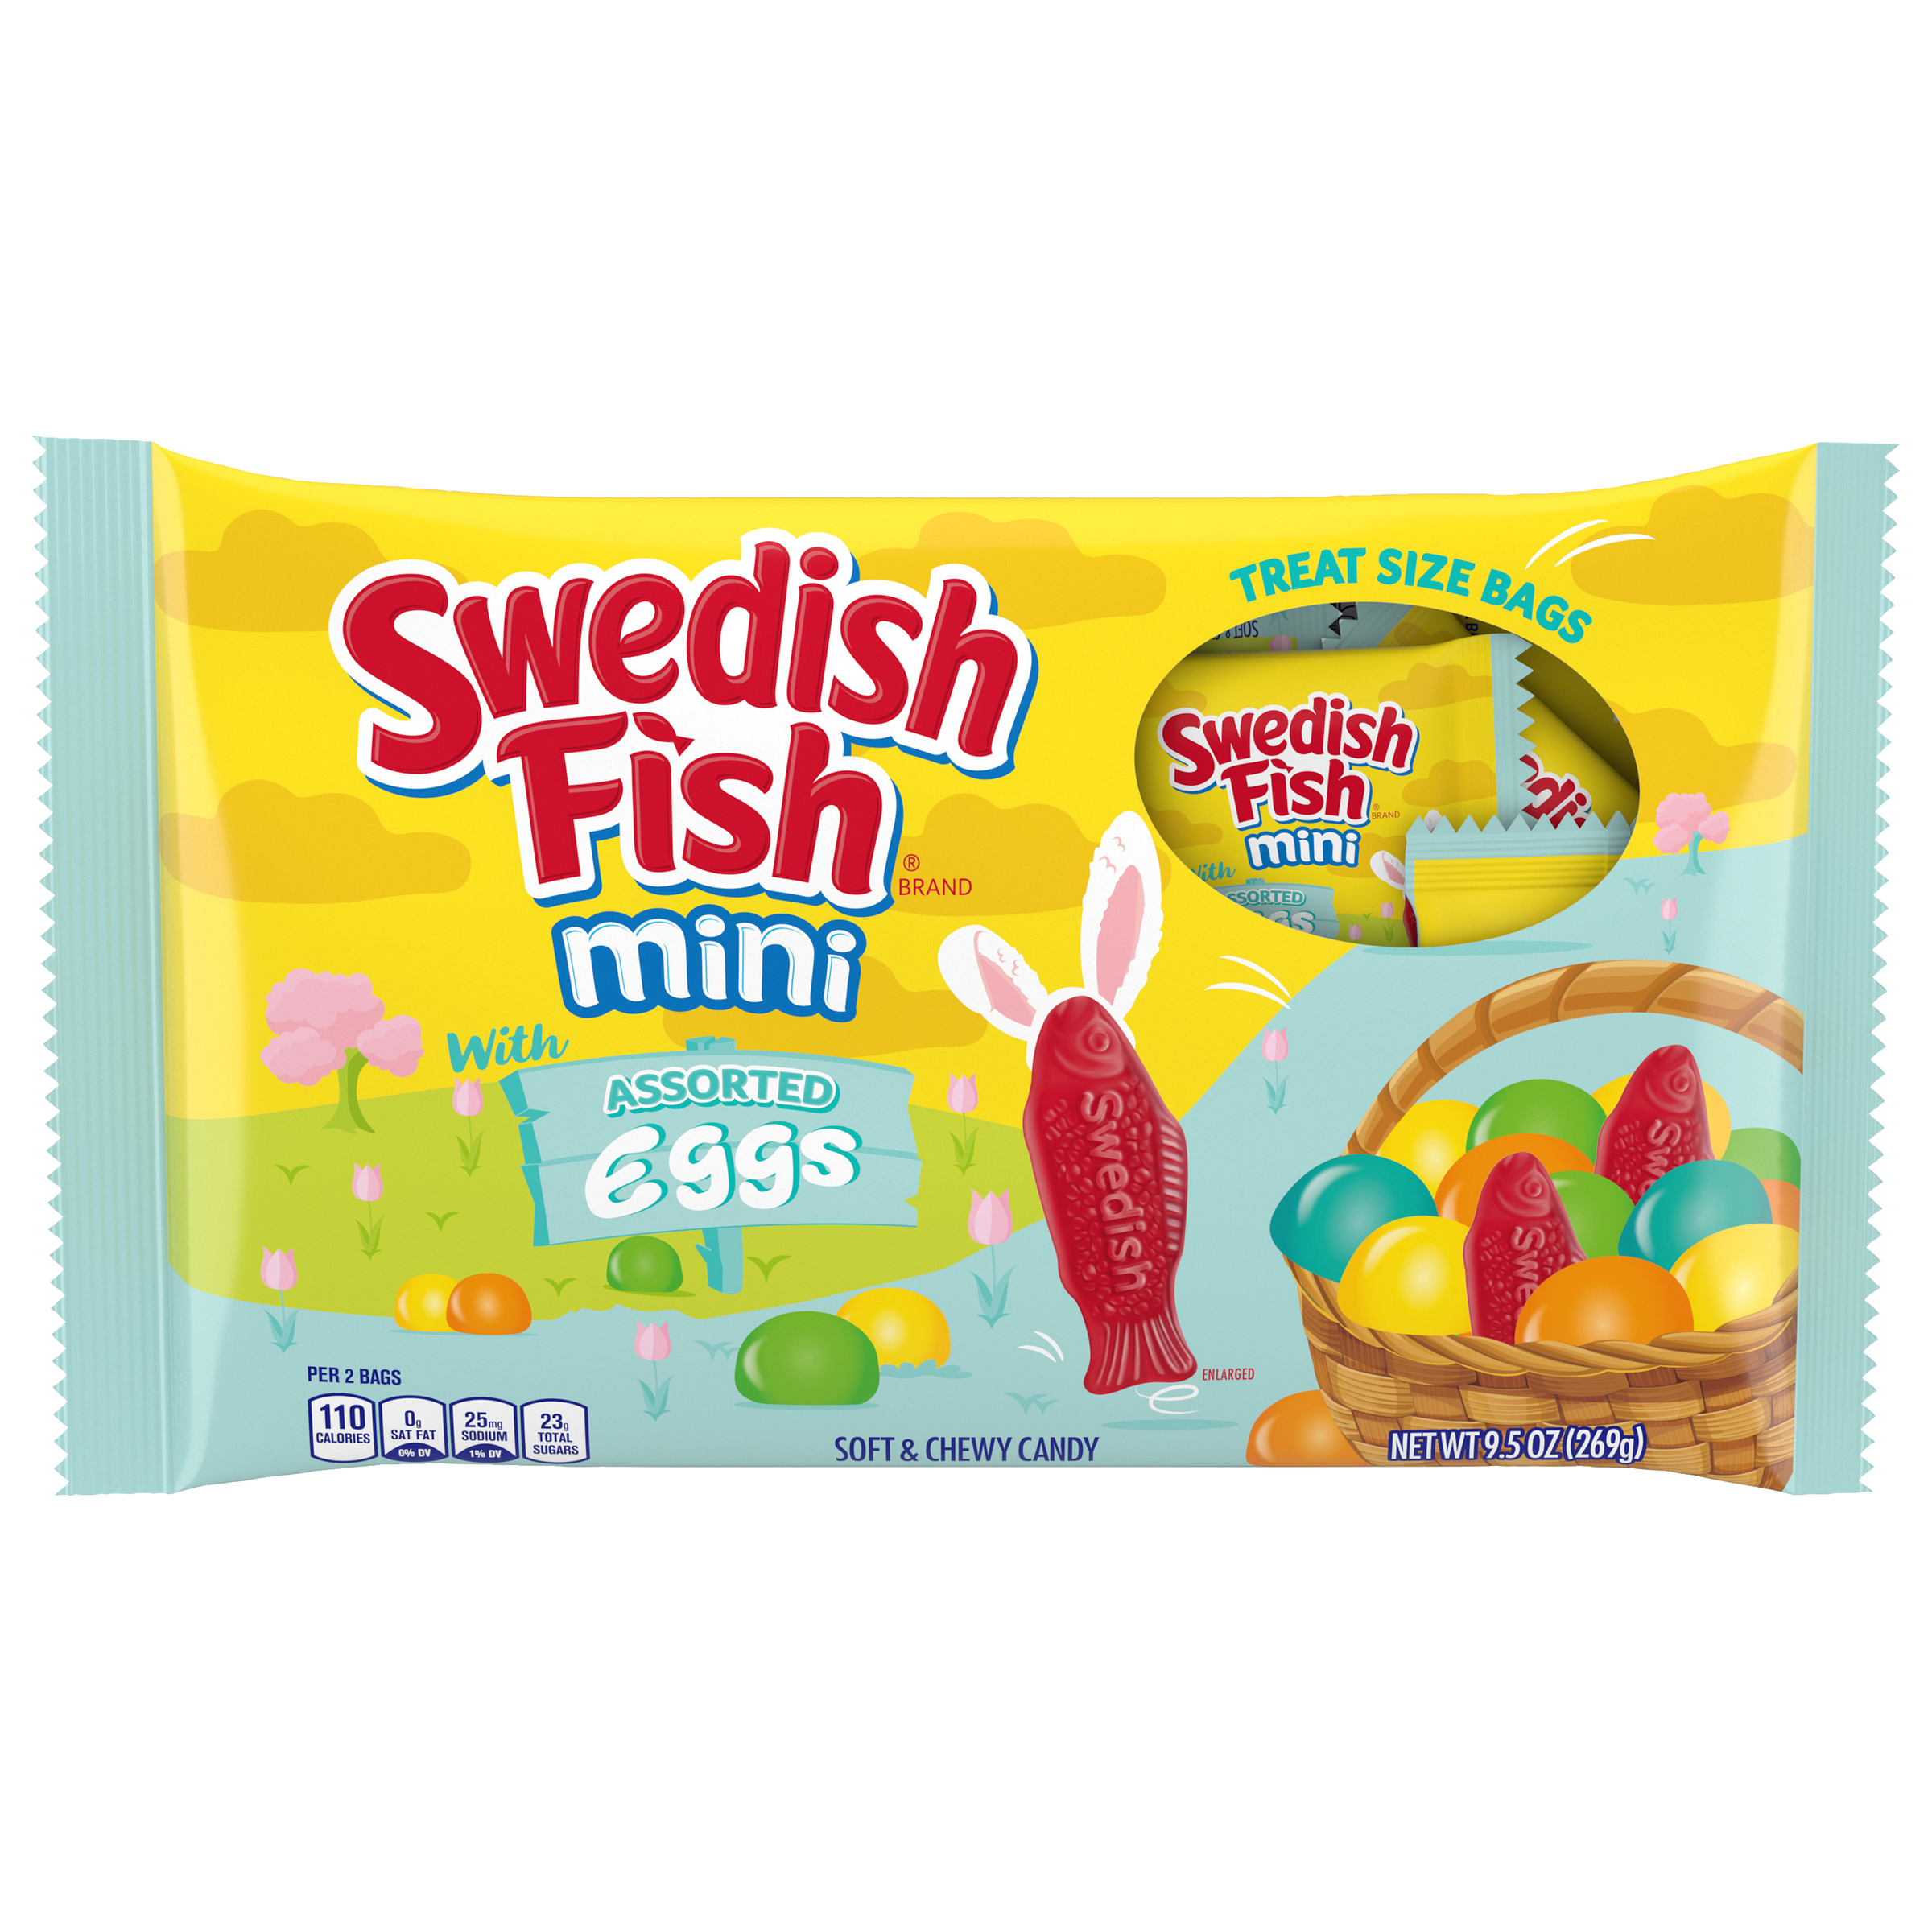 SWEDISH FISH Soft & Chewy Assorted Easter Eggs Easter Candy, 18 Snack Packs